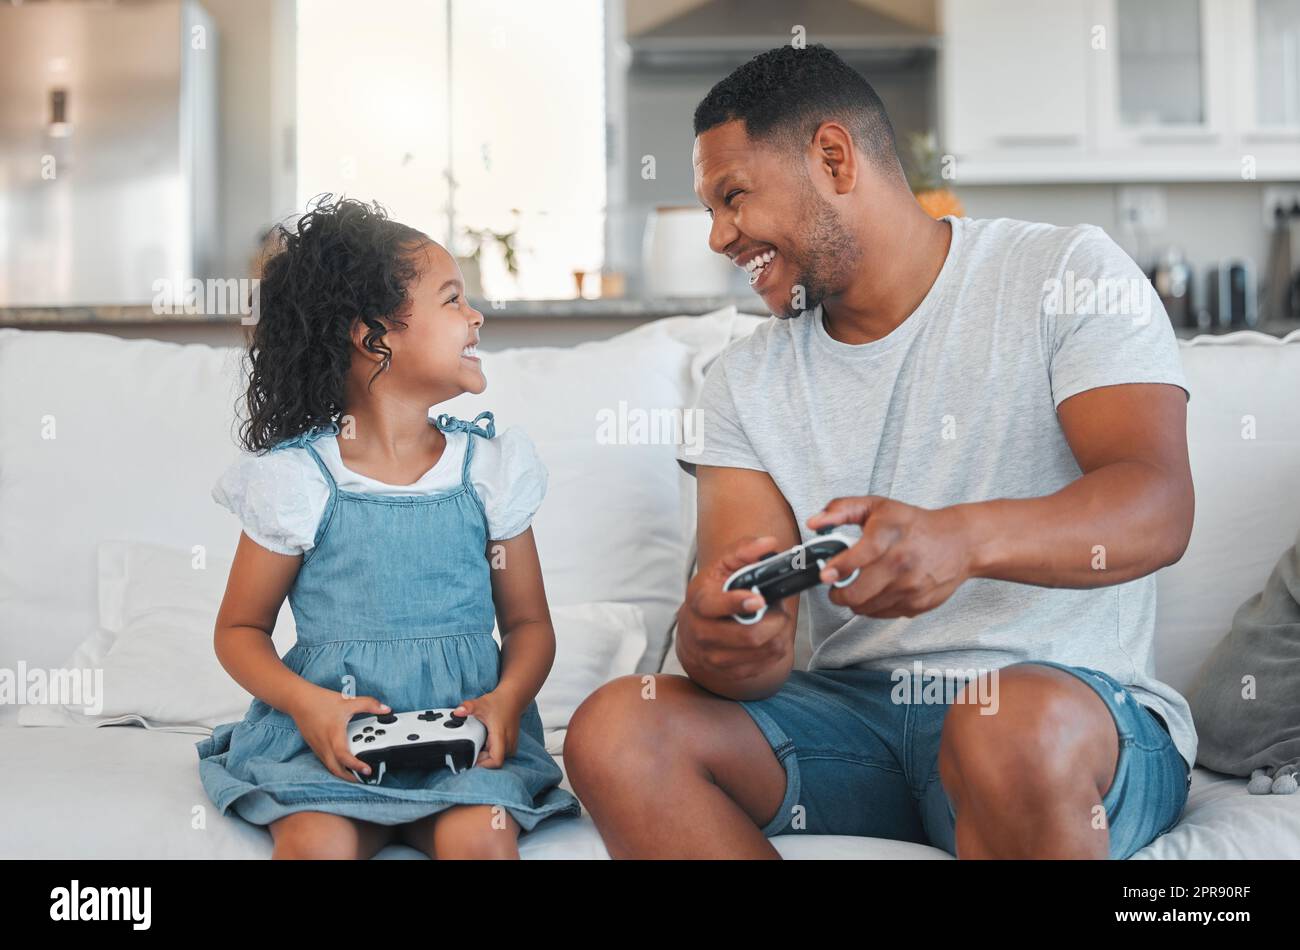 I can beat you dad. a young man playing video games with his daughter at home. Stock Photo